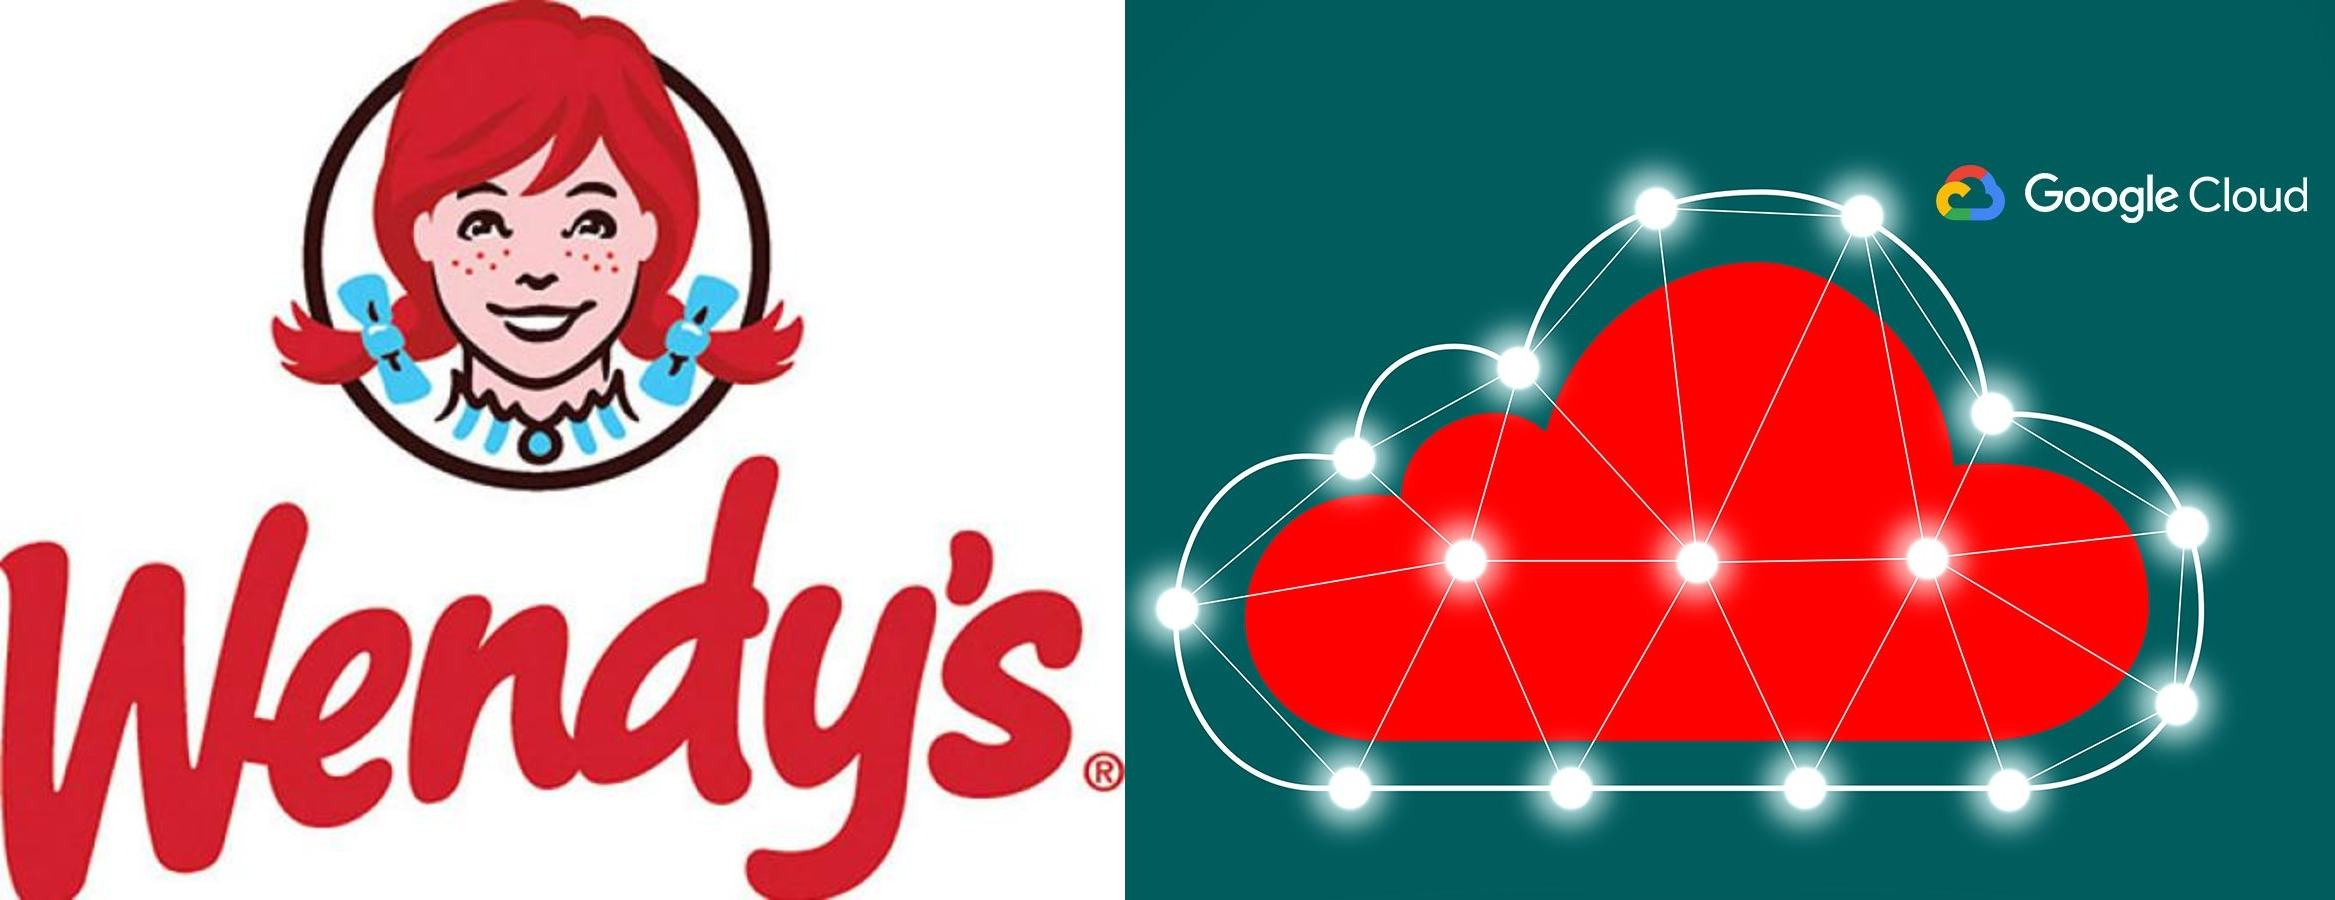 Wendy's, Google Partner to Enhance Fast Food Chain's Restaurant Experience